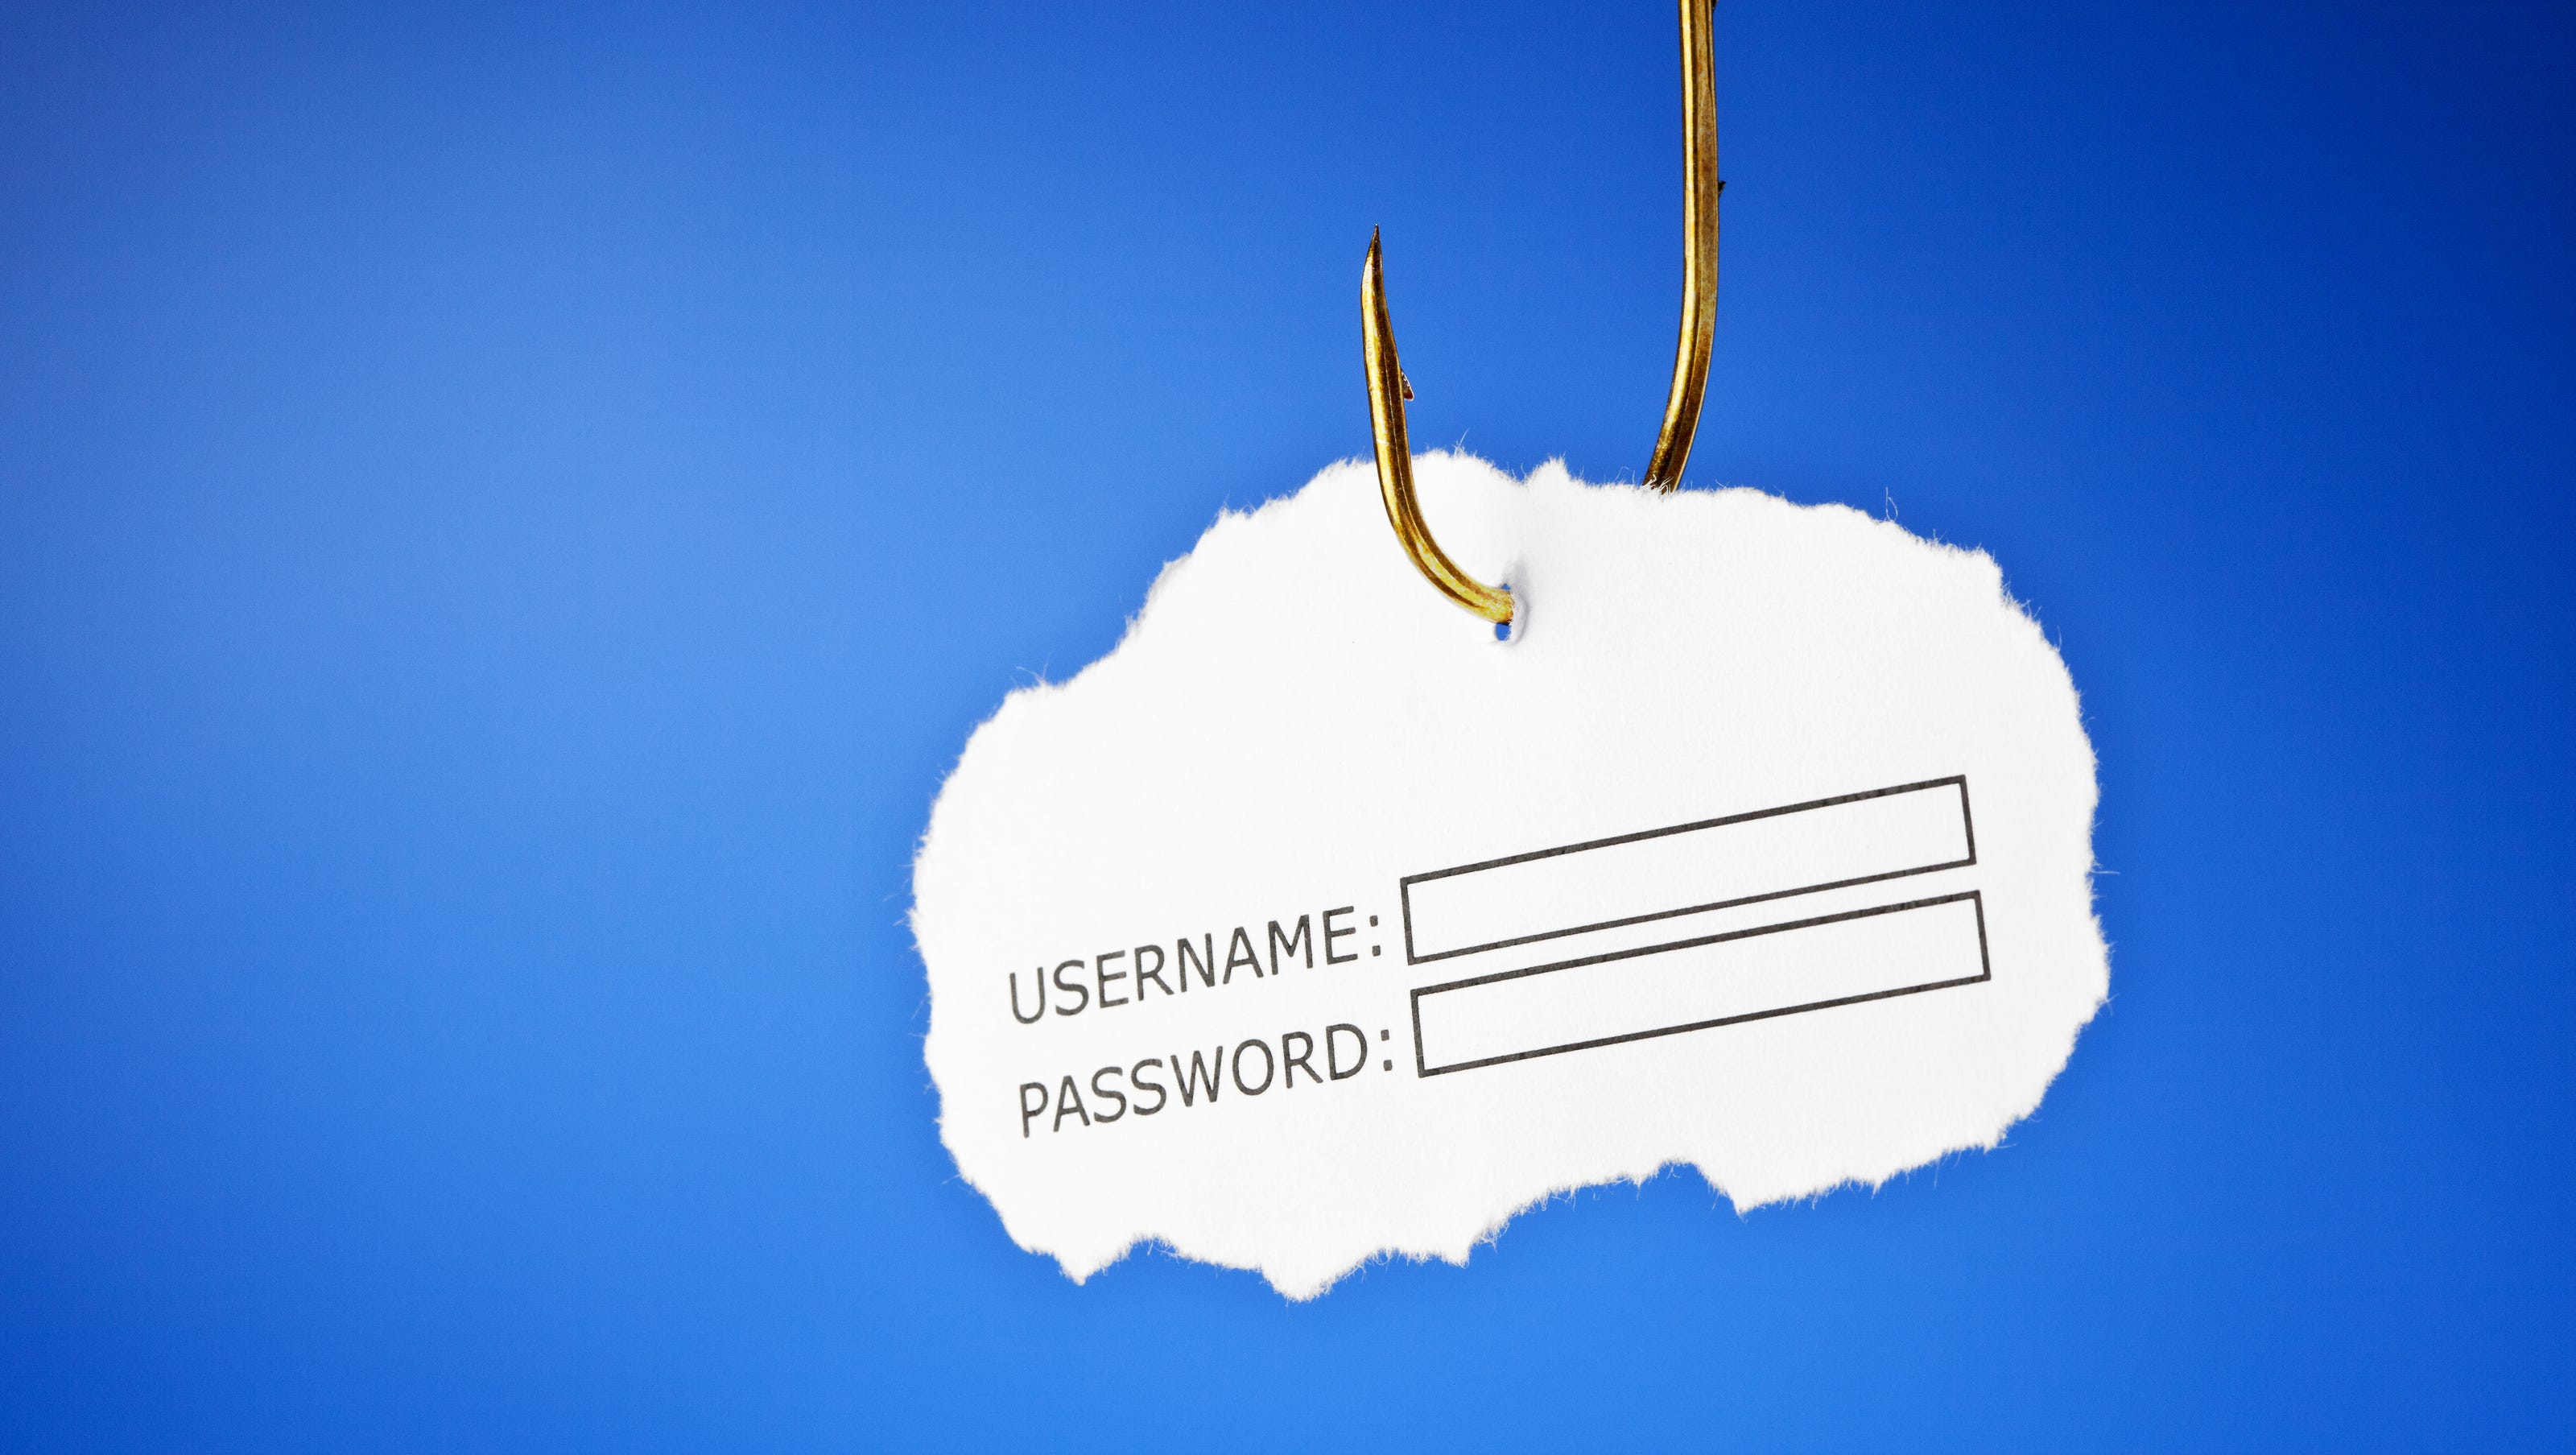 How To Prevent Phishing Scams